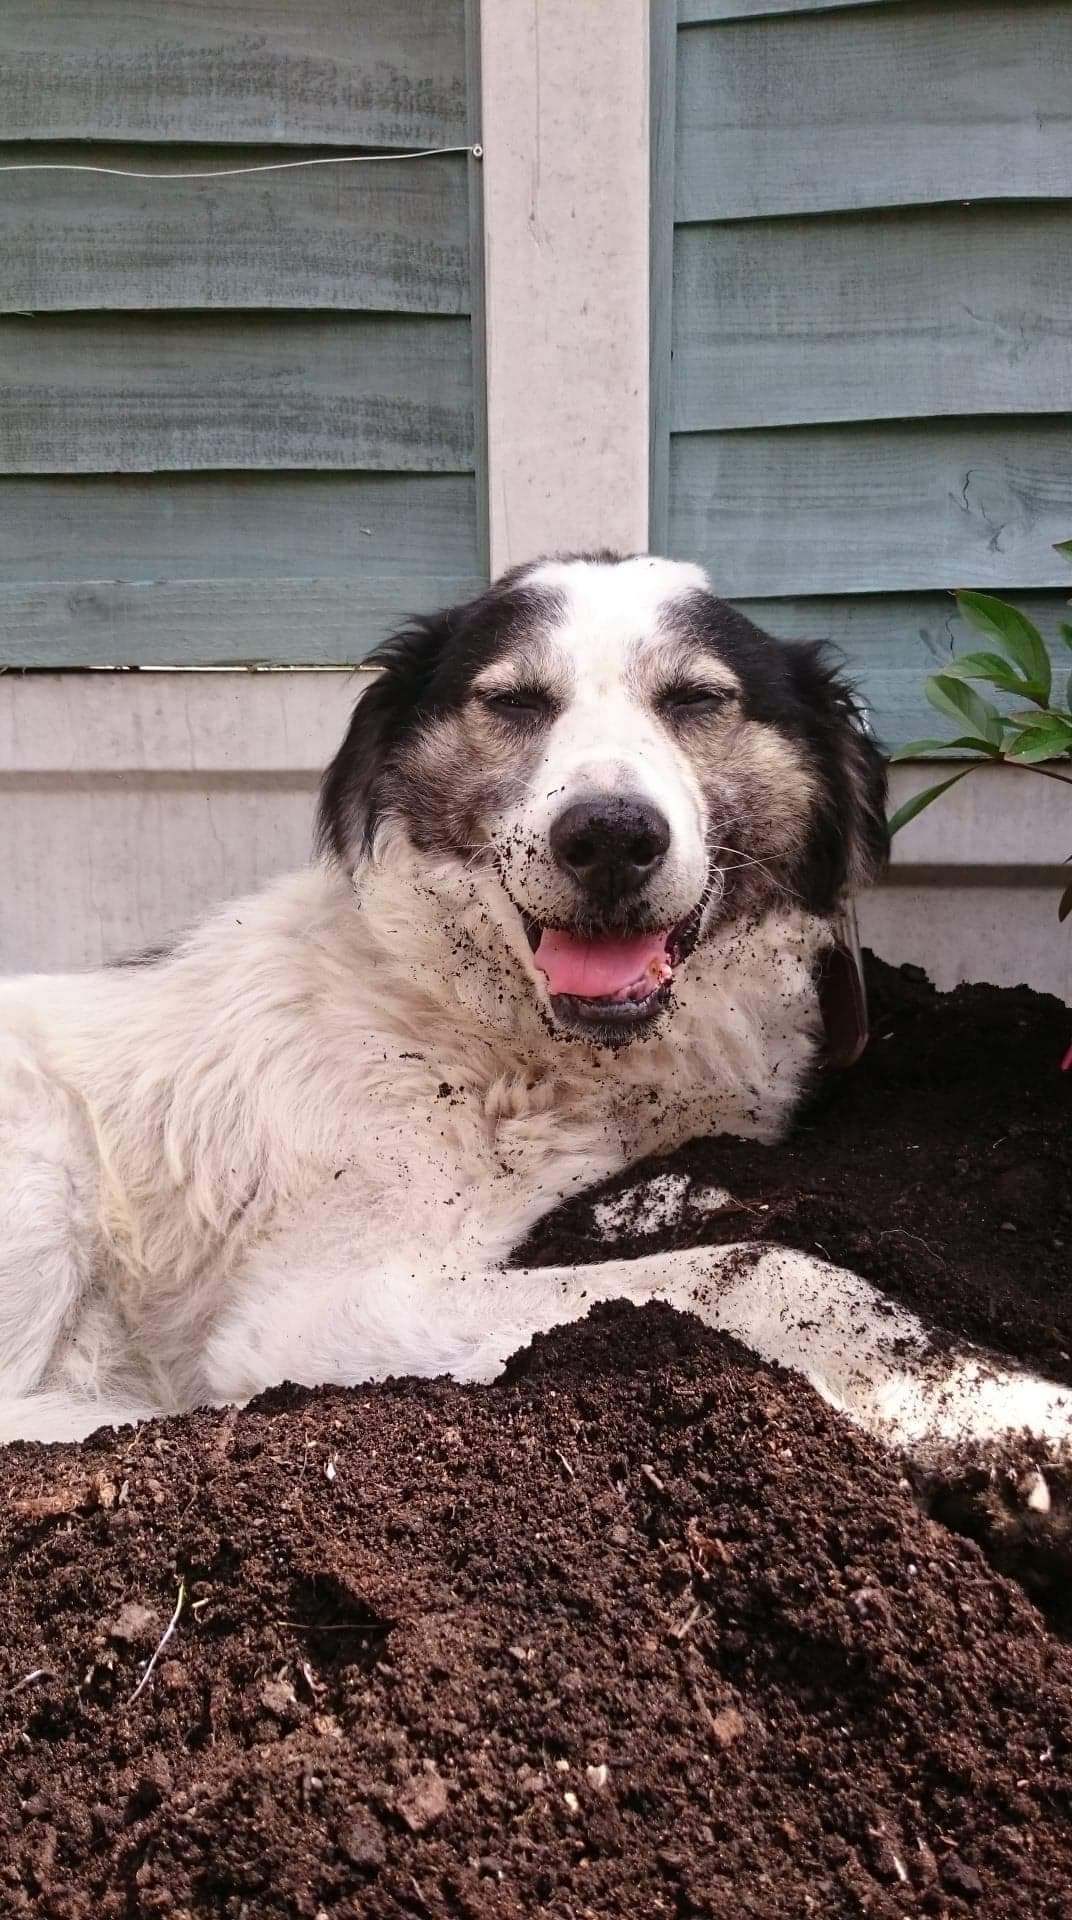 Leo a Romanian rescue lying in soil | 1 Dog At a Time Rescue UK